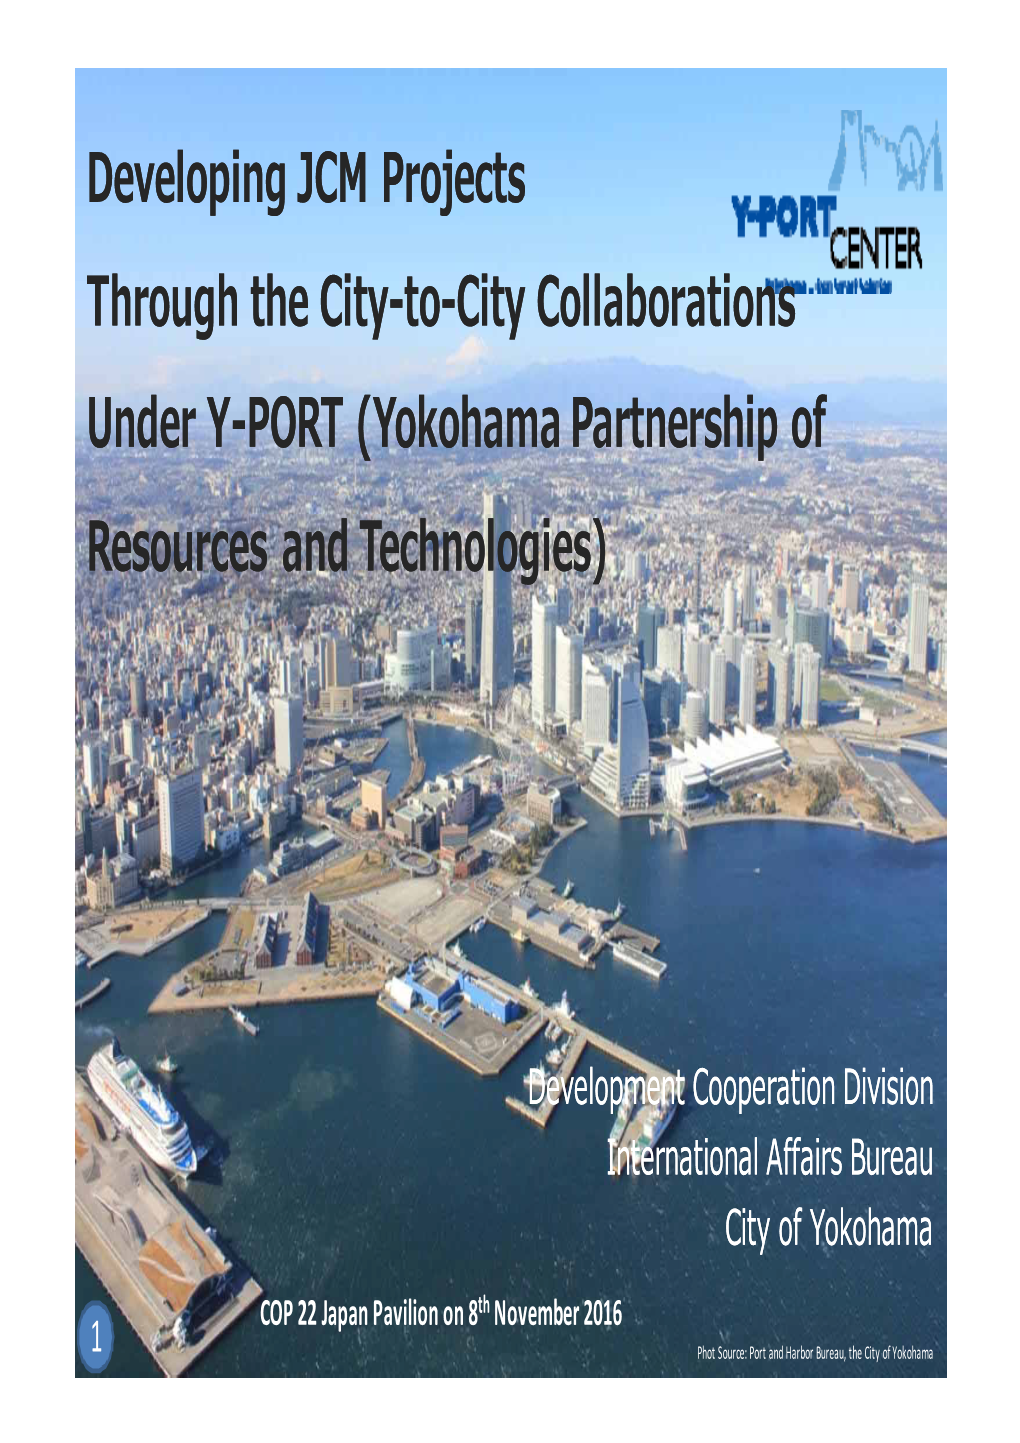 Developing JCM Projects Through the City-To-City Collaborations Under Y-PORT (Yokohama Partnership of Resources and Technologies)